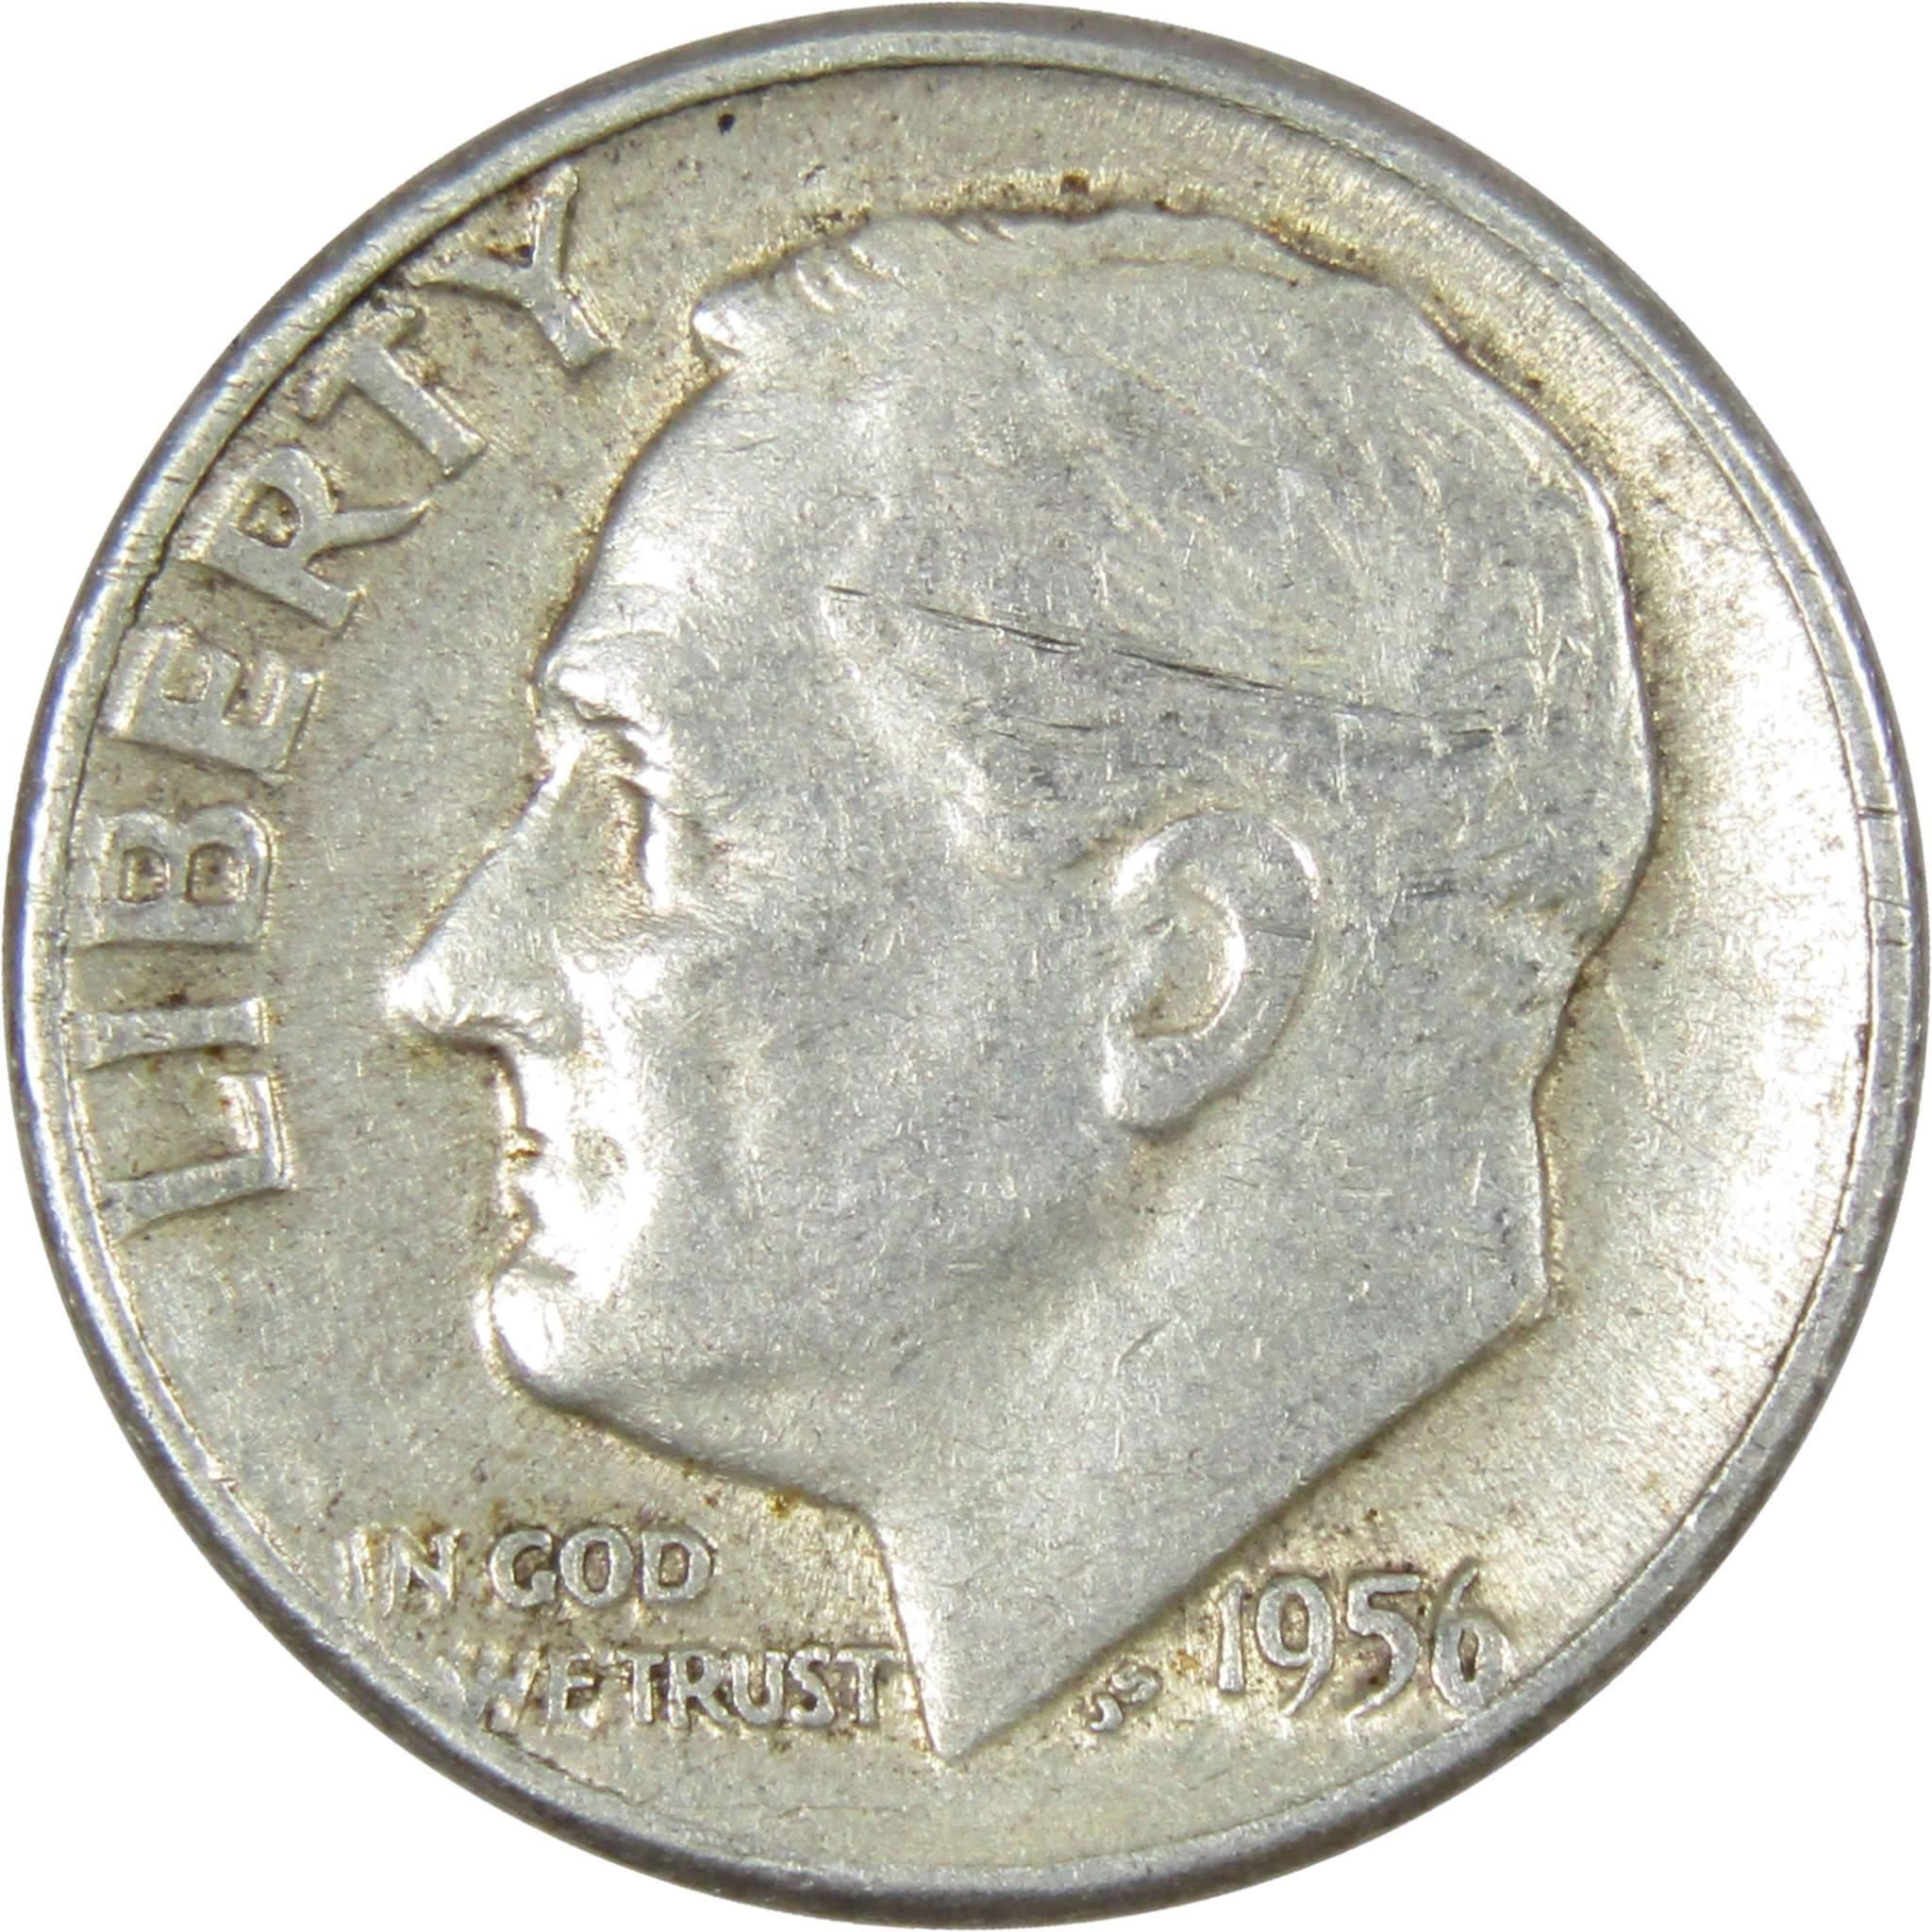 1956 Roosevelt Dime AG About Good 90% Silver 10c US Coin Collectible